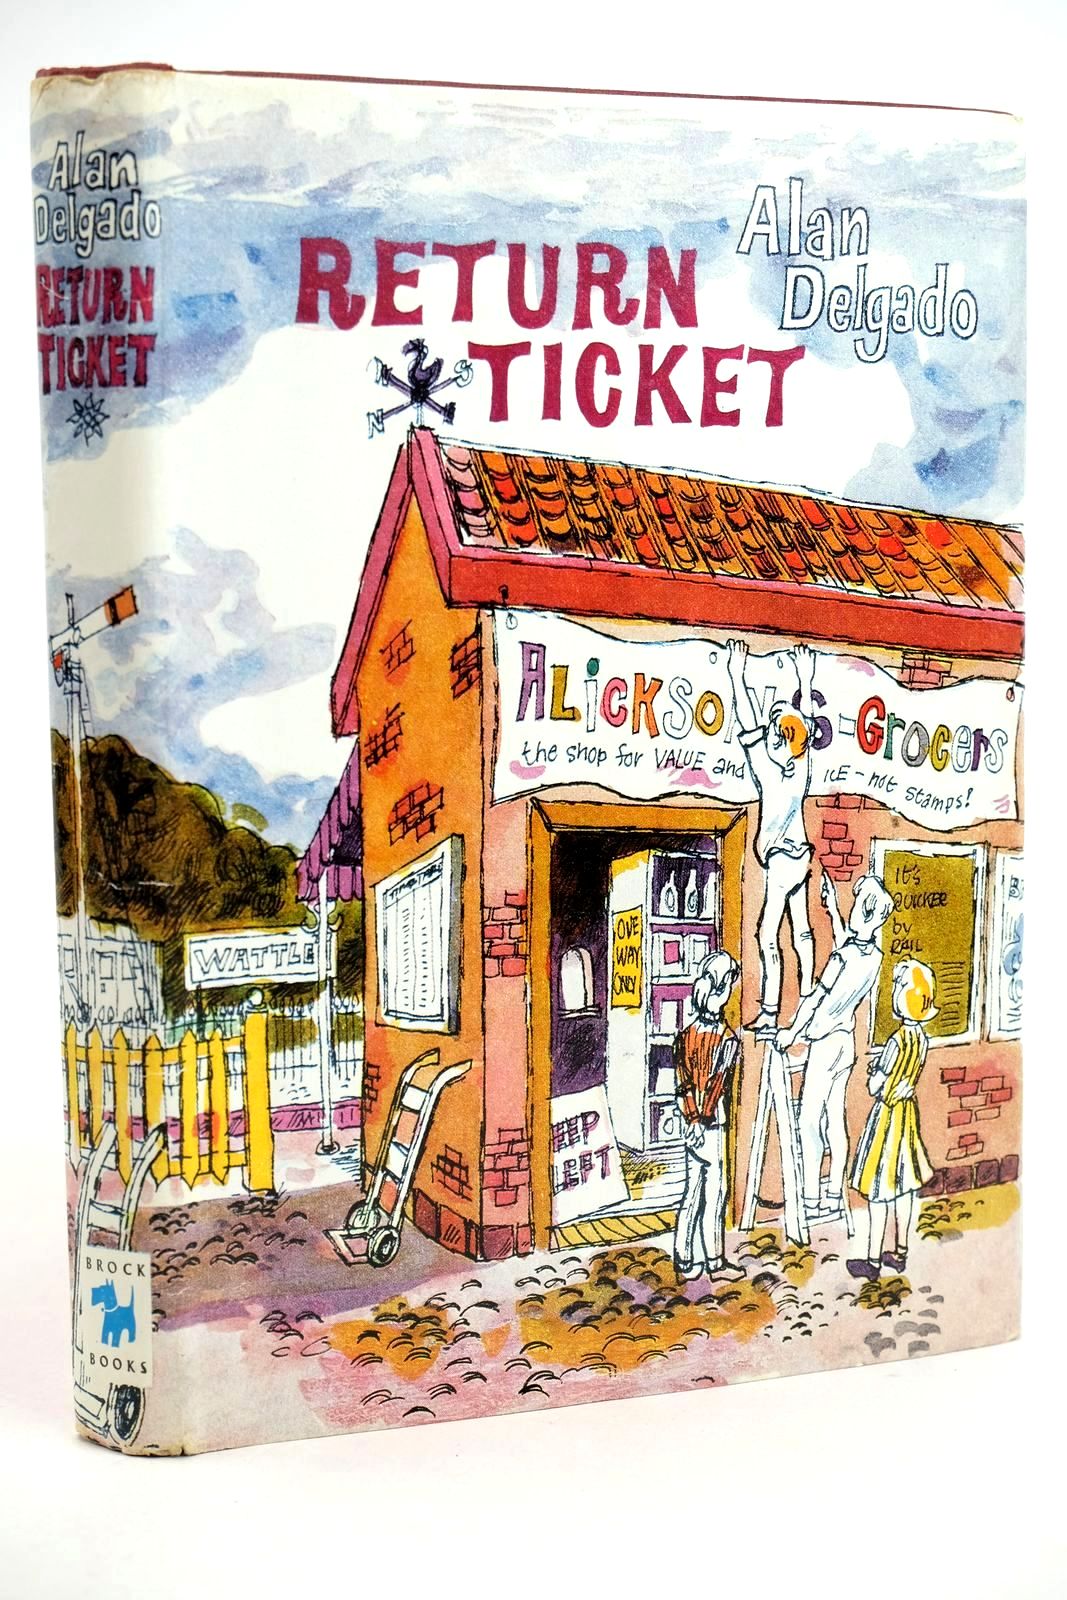 Photo of RETURN TICKET written by Delgado, Alan illustrated by Lewis, Edward published by Brockhampton Press Ltd. (STOCK CODE: 1318950)  for sale by Stella & Rose's Books